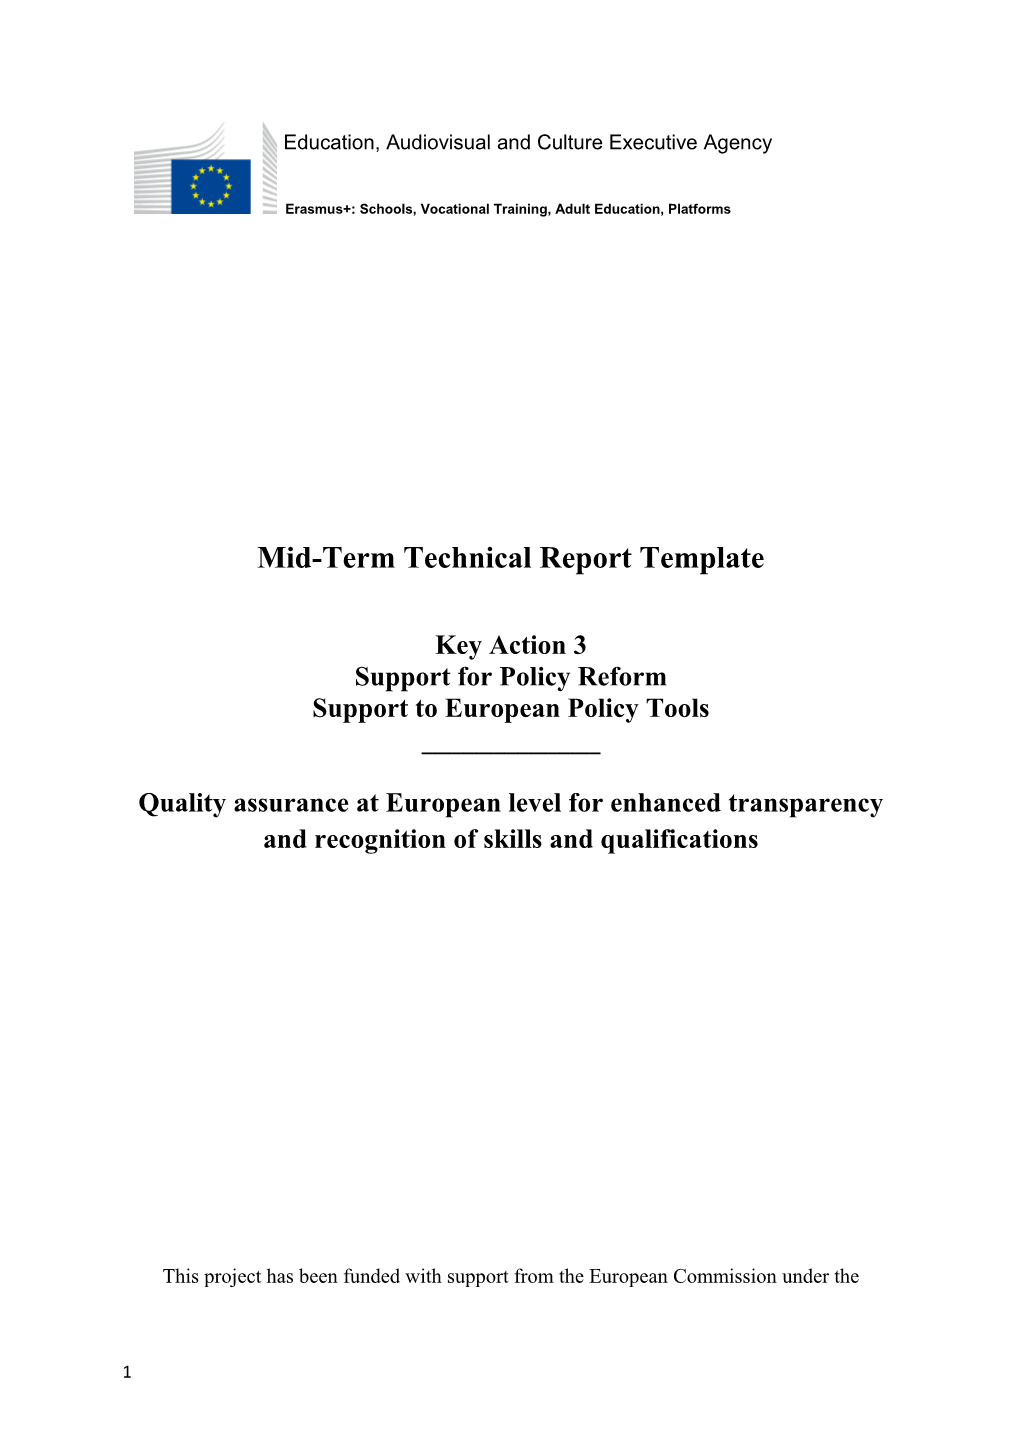 Mid-Term Technical Report Template